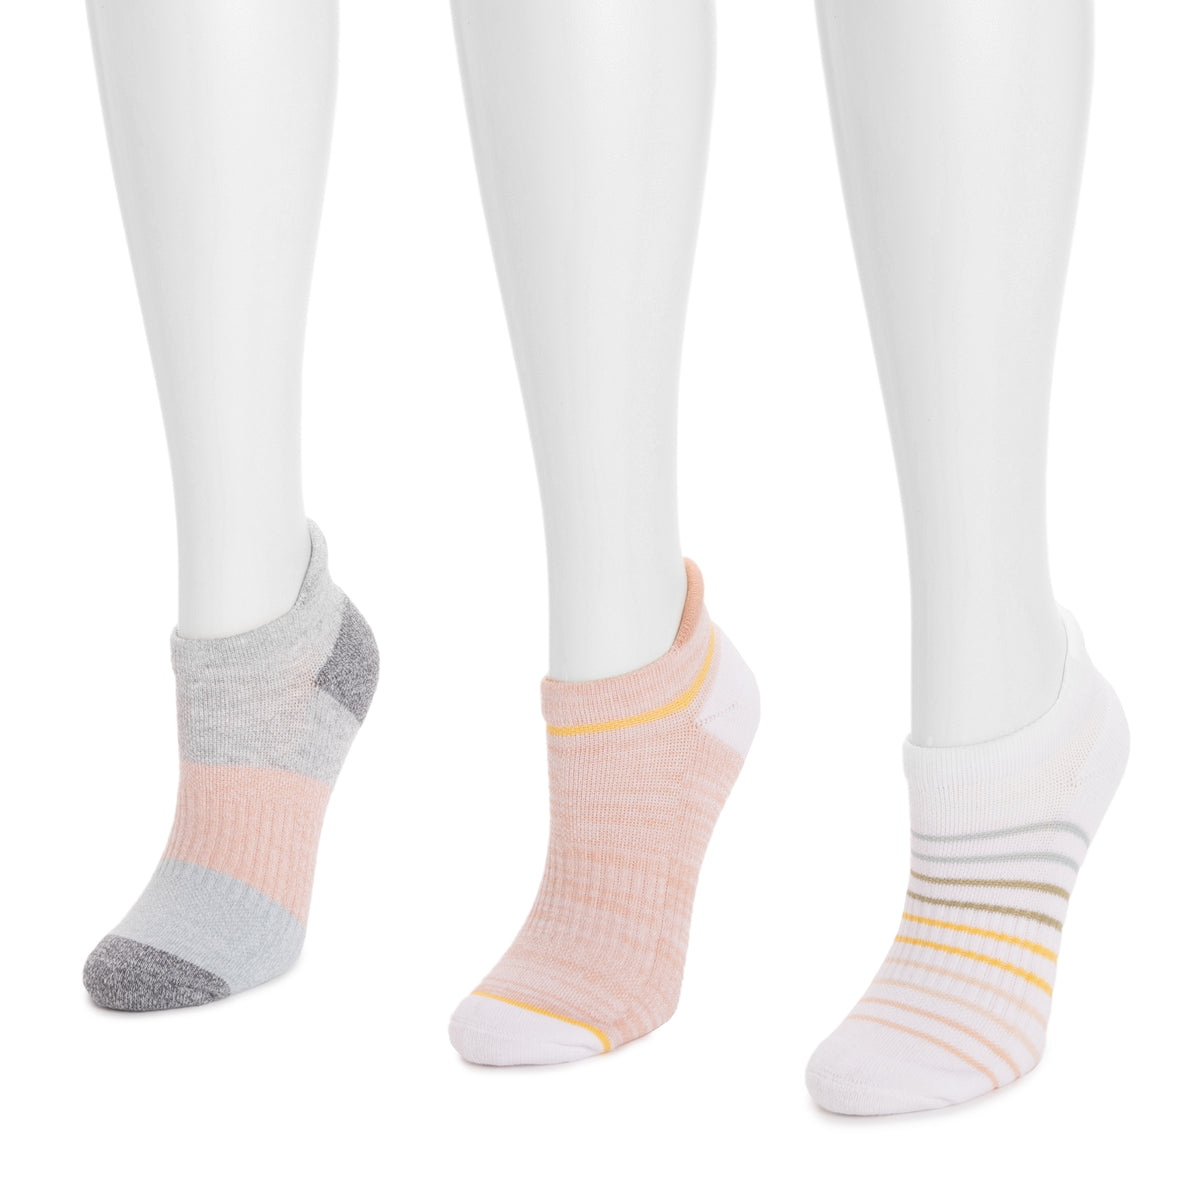 Women's 3 Pack Cotton Compression Ankle Socks